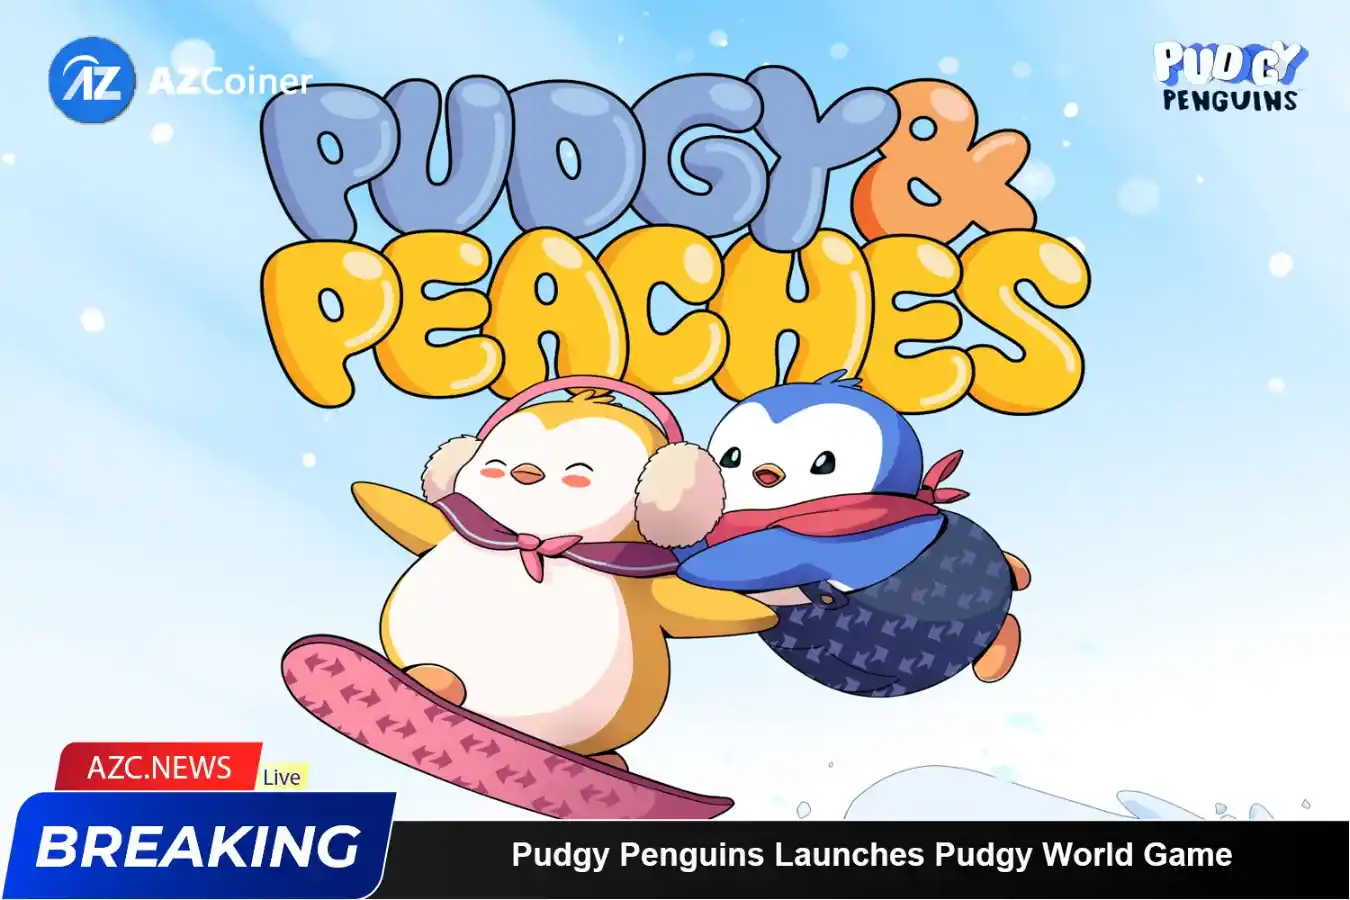 Pudgy Penguins Launches Pudgy World Game_65b9798586899.webp